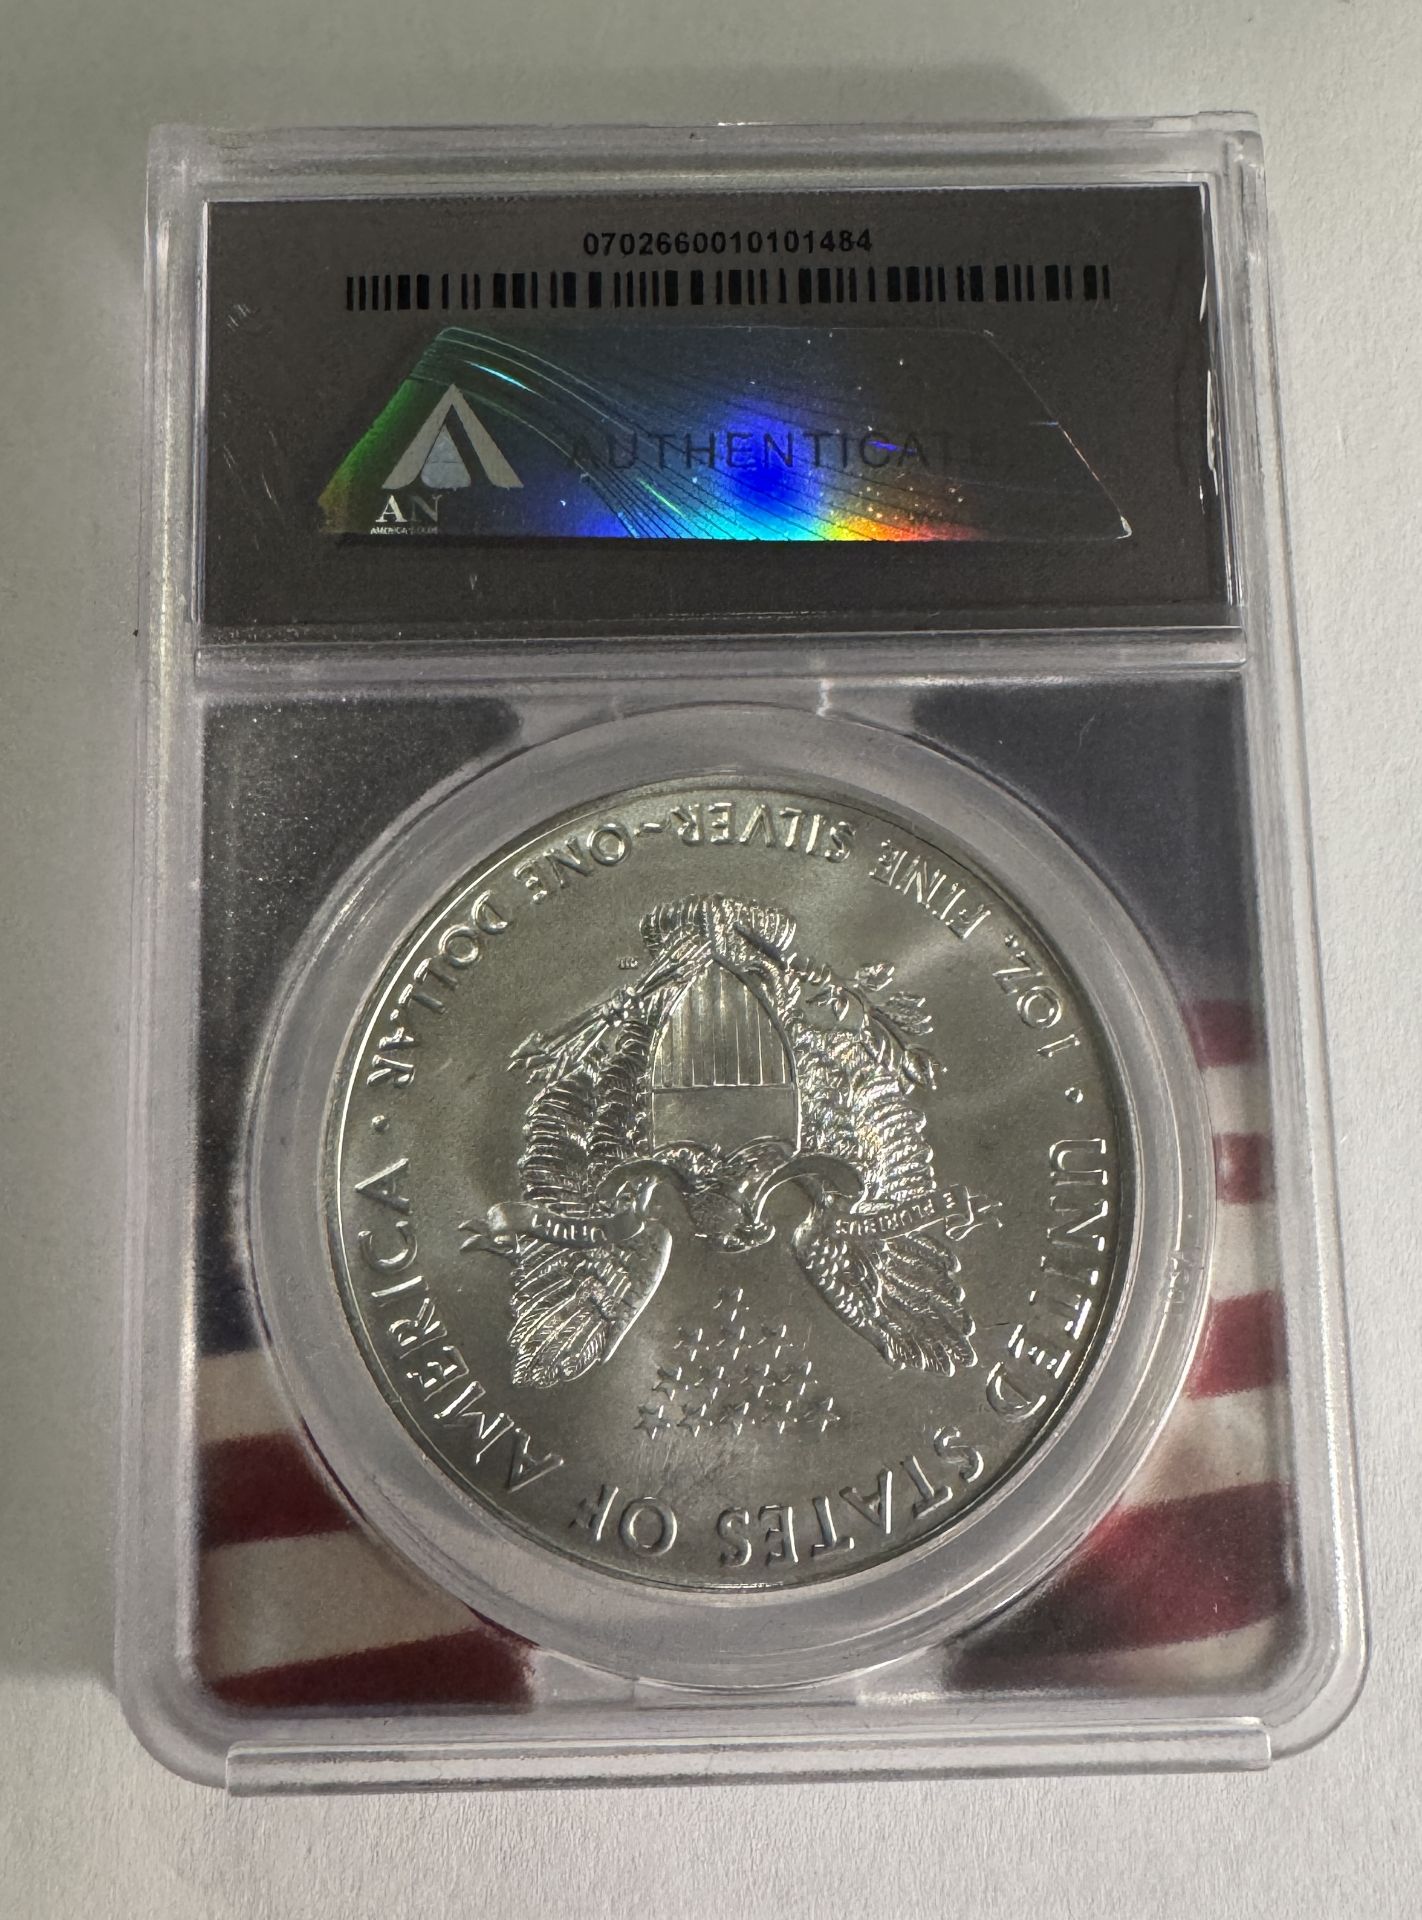 2020 S$1 ANACS MS-70 SILVER EAGLE - Image 2 of 2